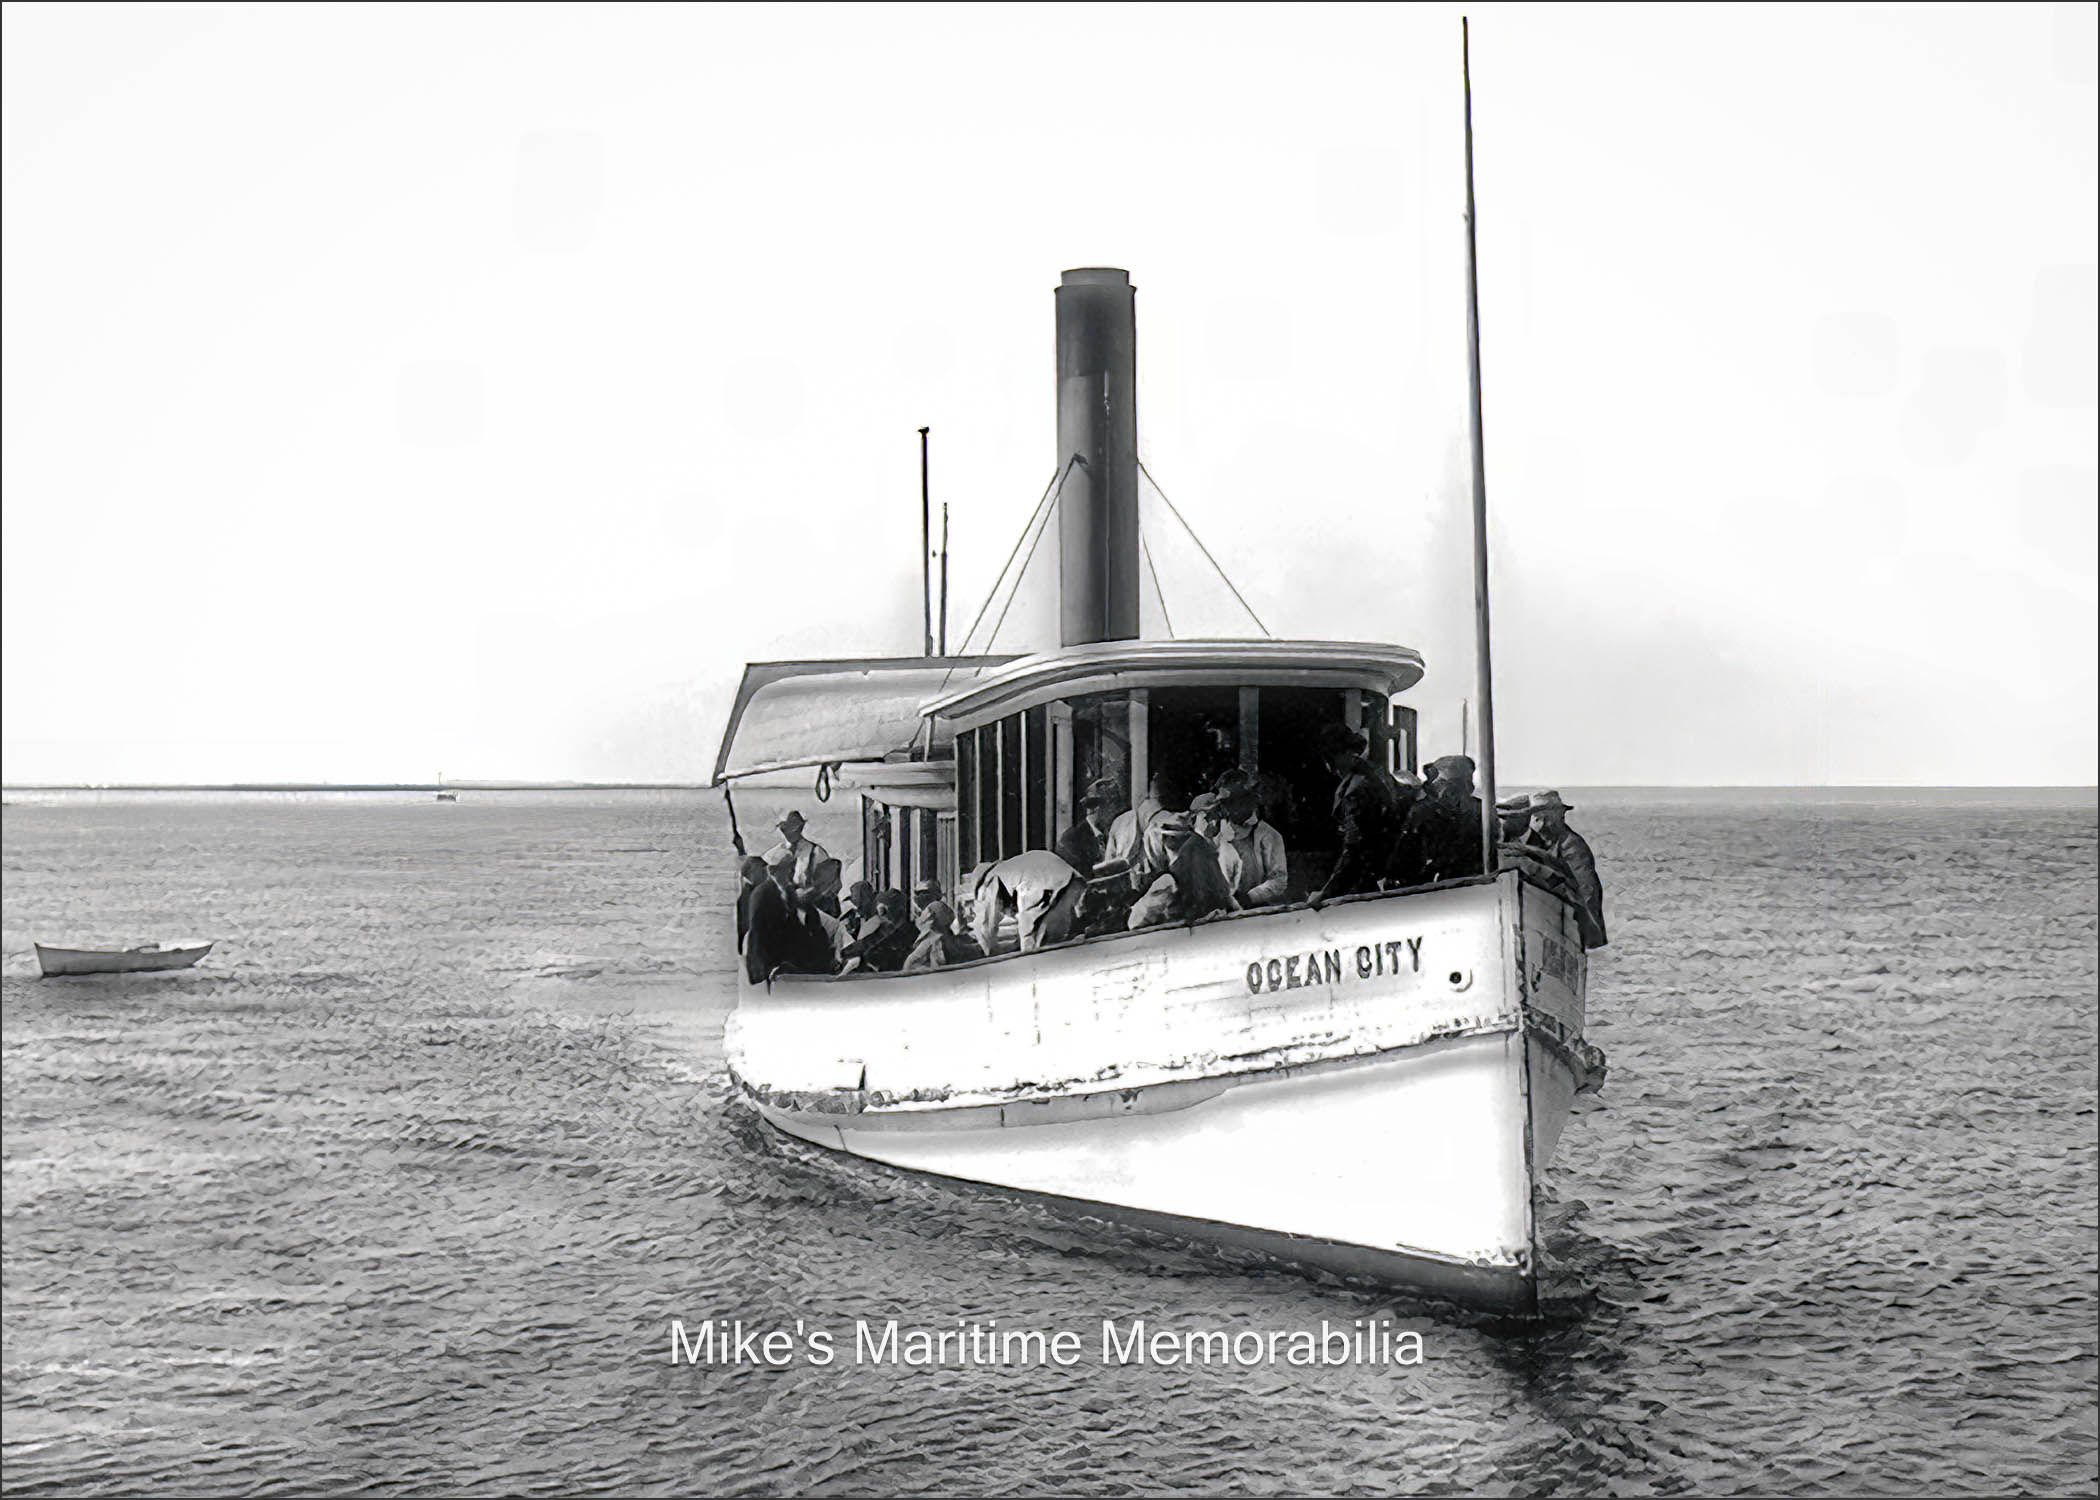 OCEAN CITY, Somers Point, NJ – 1907 Built in 1900 at Greenport, NY, the "OCEAN CITY" sailed from Somers Point, New Jersey. Besides offering daily trips to the 'Fishing Banks', she also served as a ferry, taking passengers between Somers Point and the Ocean City, NJ boardwalk. She was later sold to Captain Frank McAvoy and he relocated the "OCEAN CITY" to Canarsie, Brooklyn.